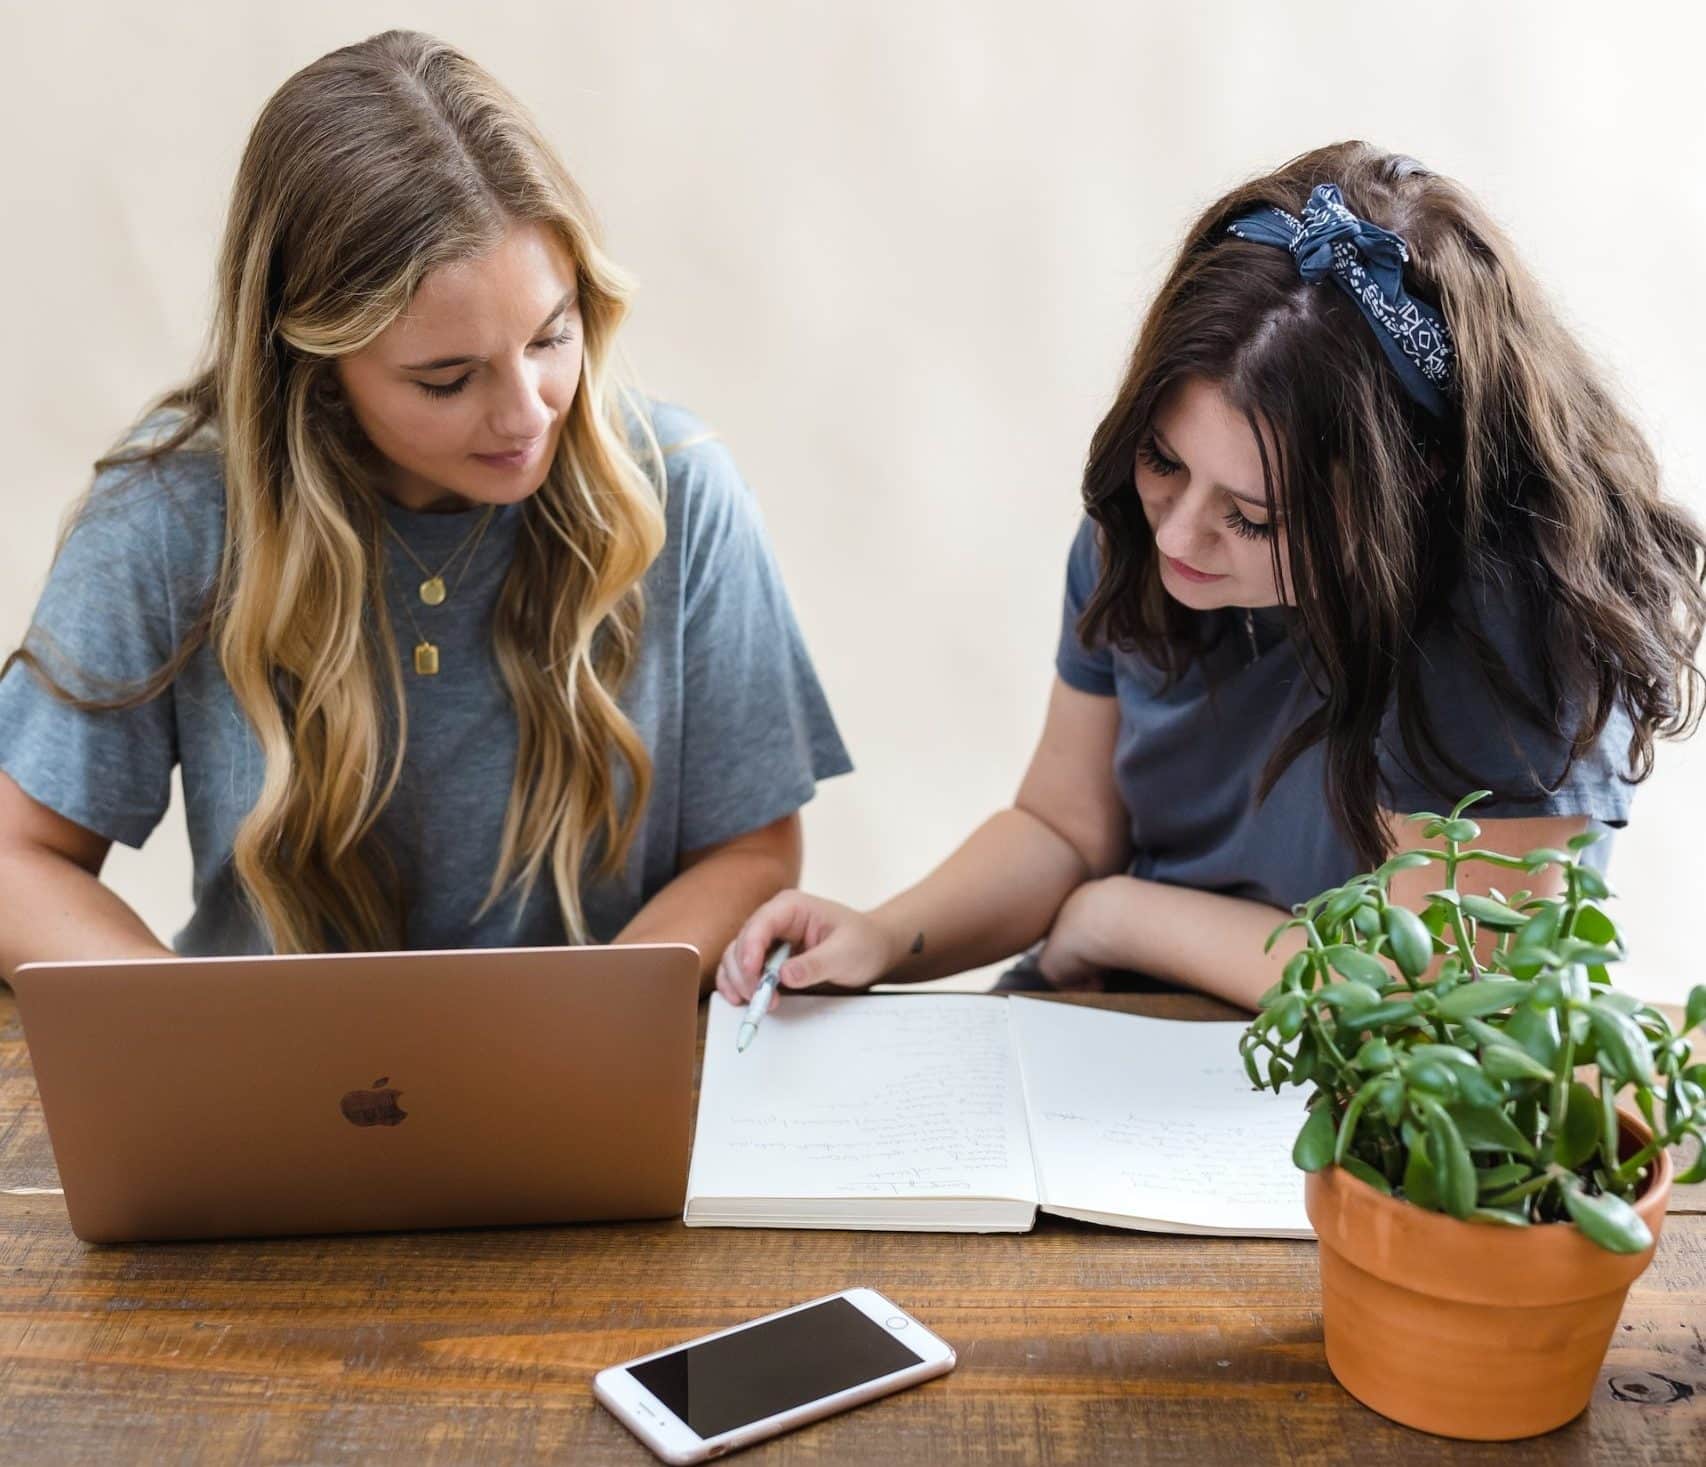 Two girls studying English at a wooden table, looking at an open book and laptop. One smartphone is put on the table.